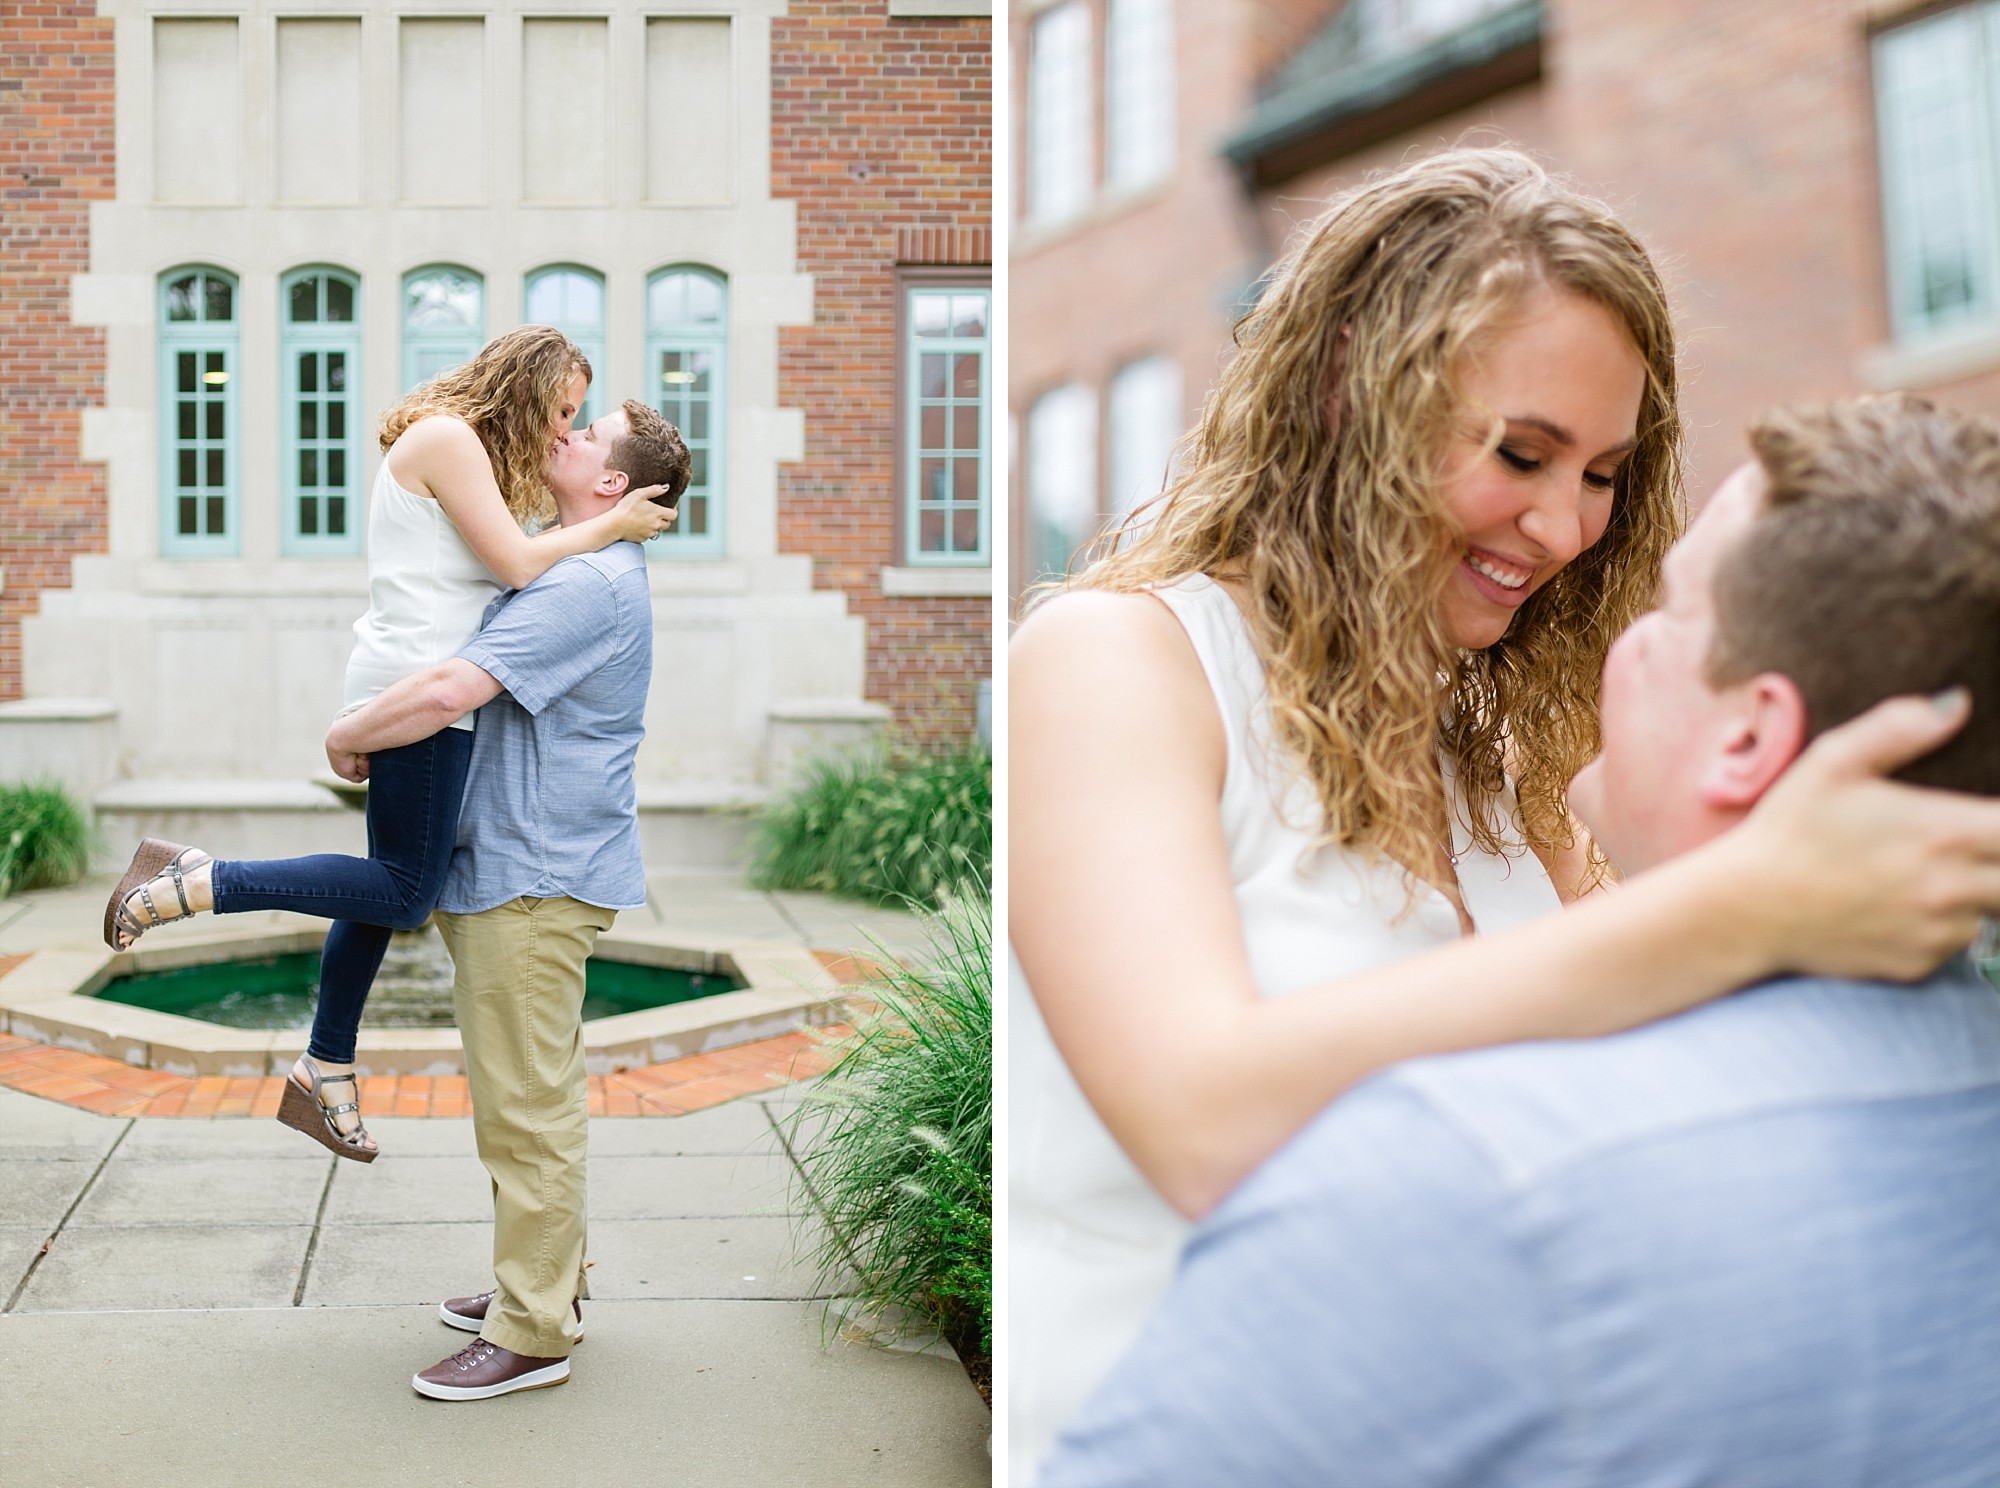 A summer engagement session in East Lansing, Michigan at Mary Mayo Hall at Michigan State University by Breanne Rochelle Photography.